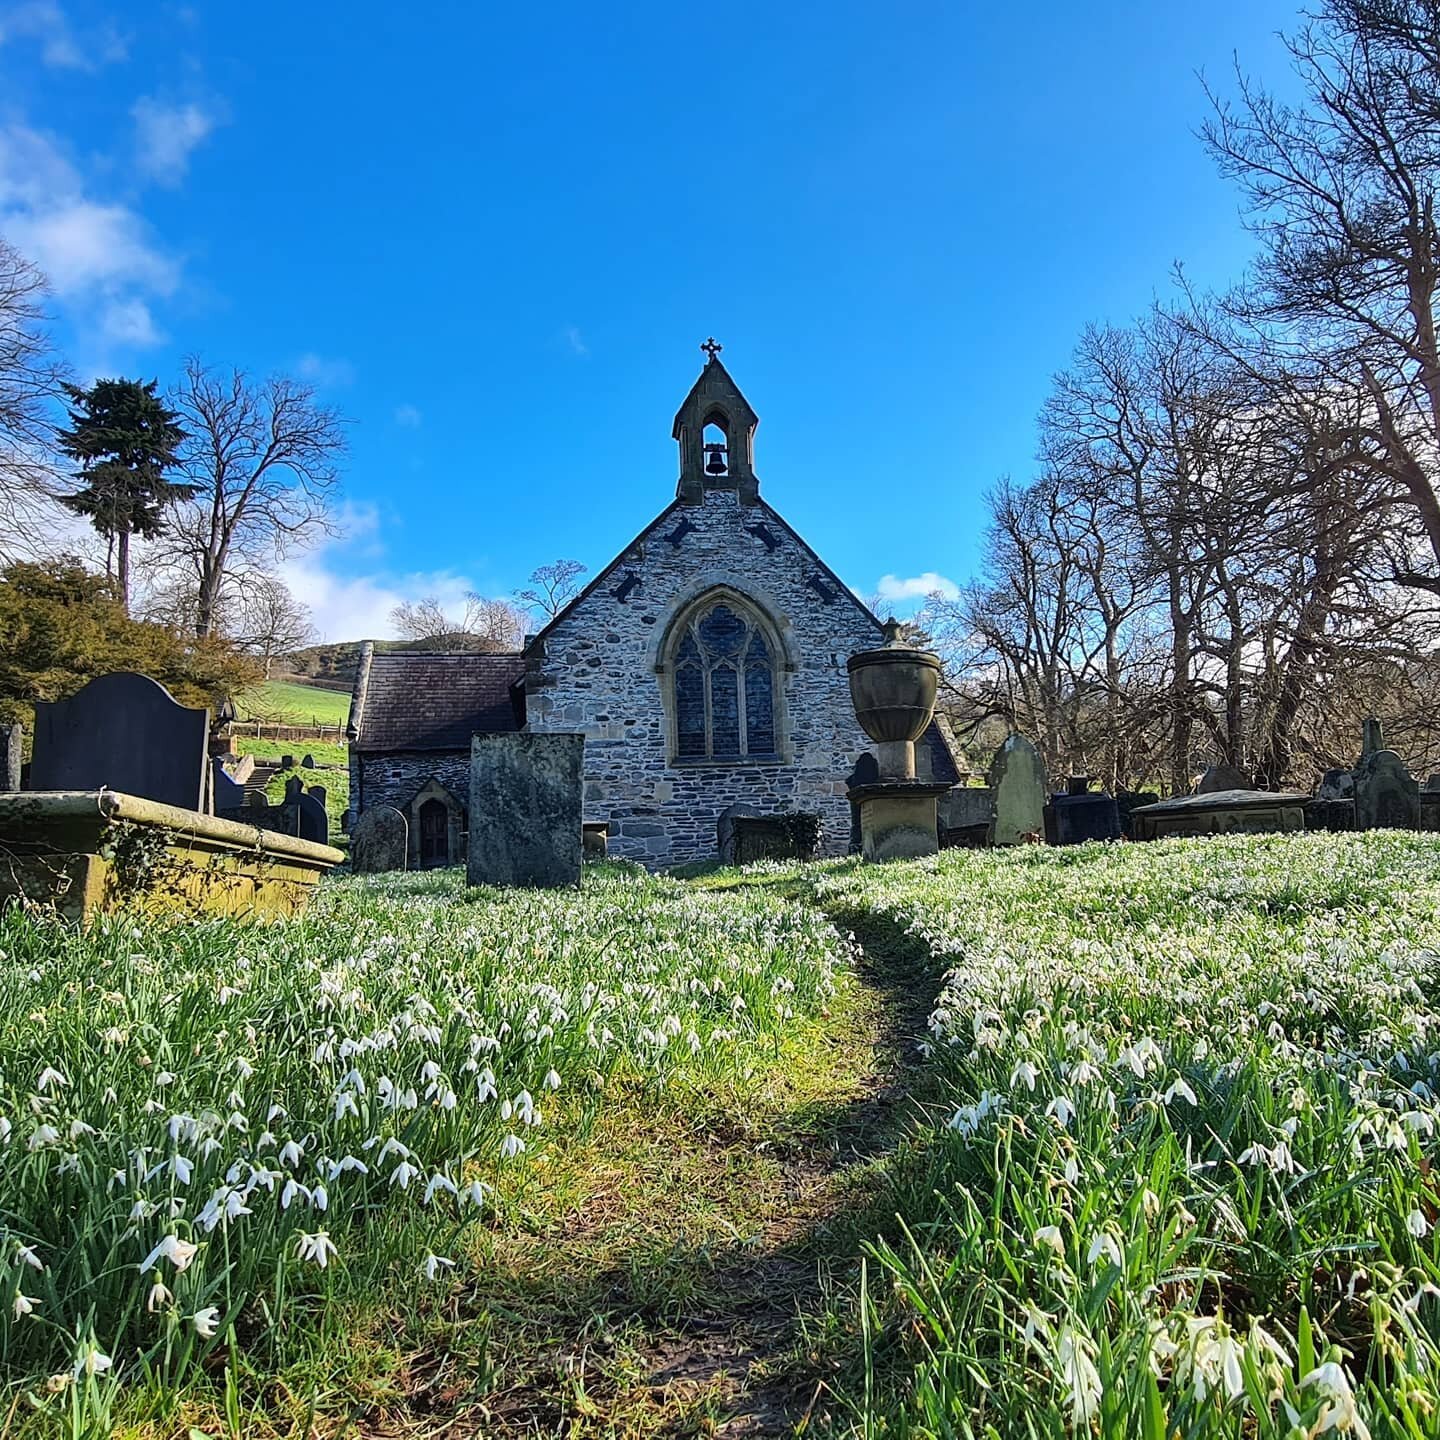 ❄ Blankets of Snowdrops &amp; a Snow Full Moon&nbsp;
⁣
Took mum to see them at Llantysillio Church this morning - an annual family ritual, walking through the graves reading all the old names and stories.&nbsp;⁣
⁣
I've definitely been watching too mu